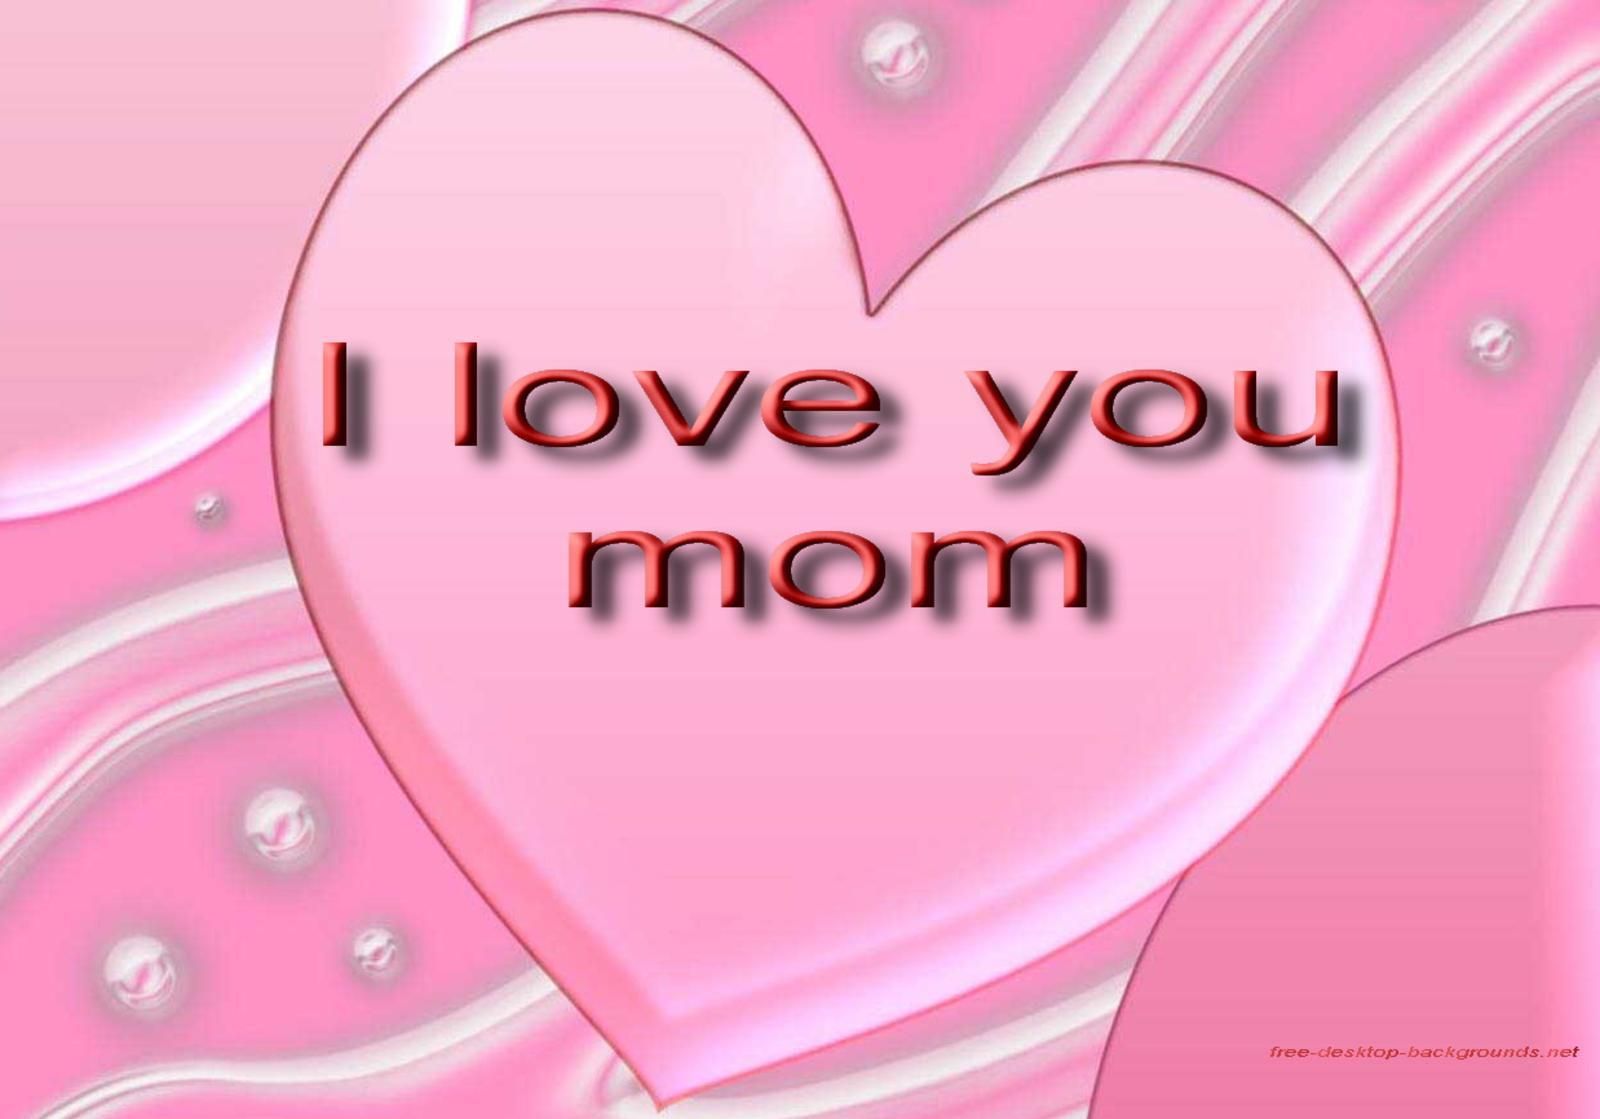 I Love Mom Pictures - HD Wallpapers Lovely